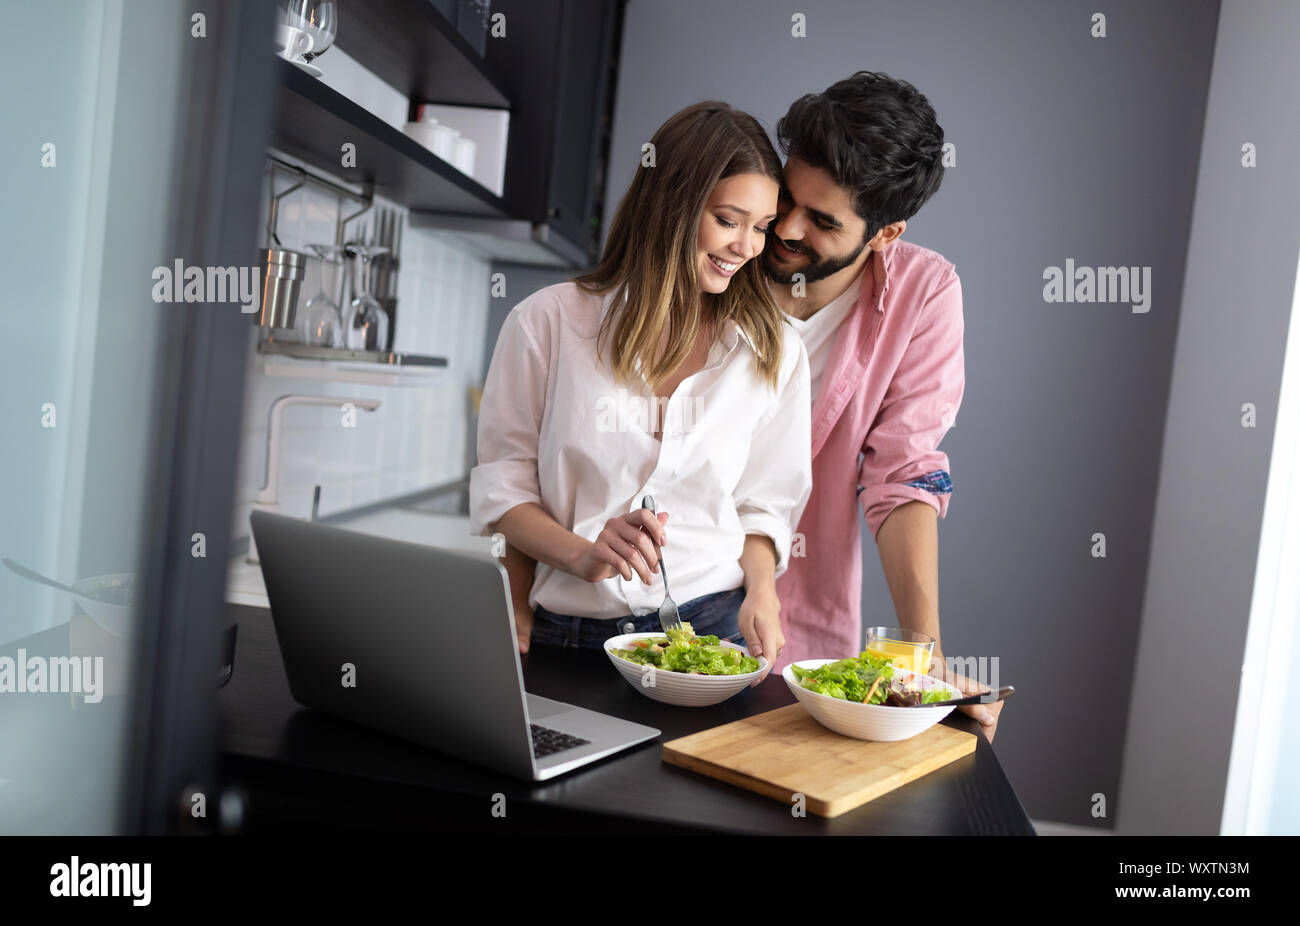 Couple enjoying breakfast time together at home. Stock Photo